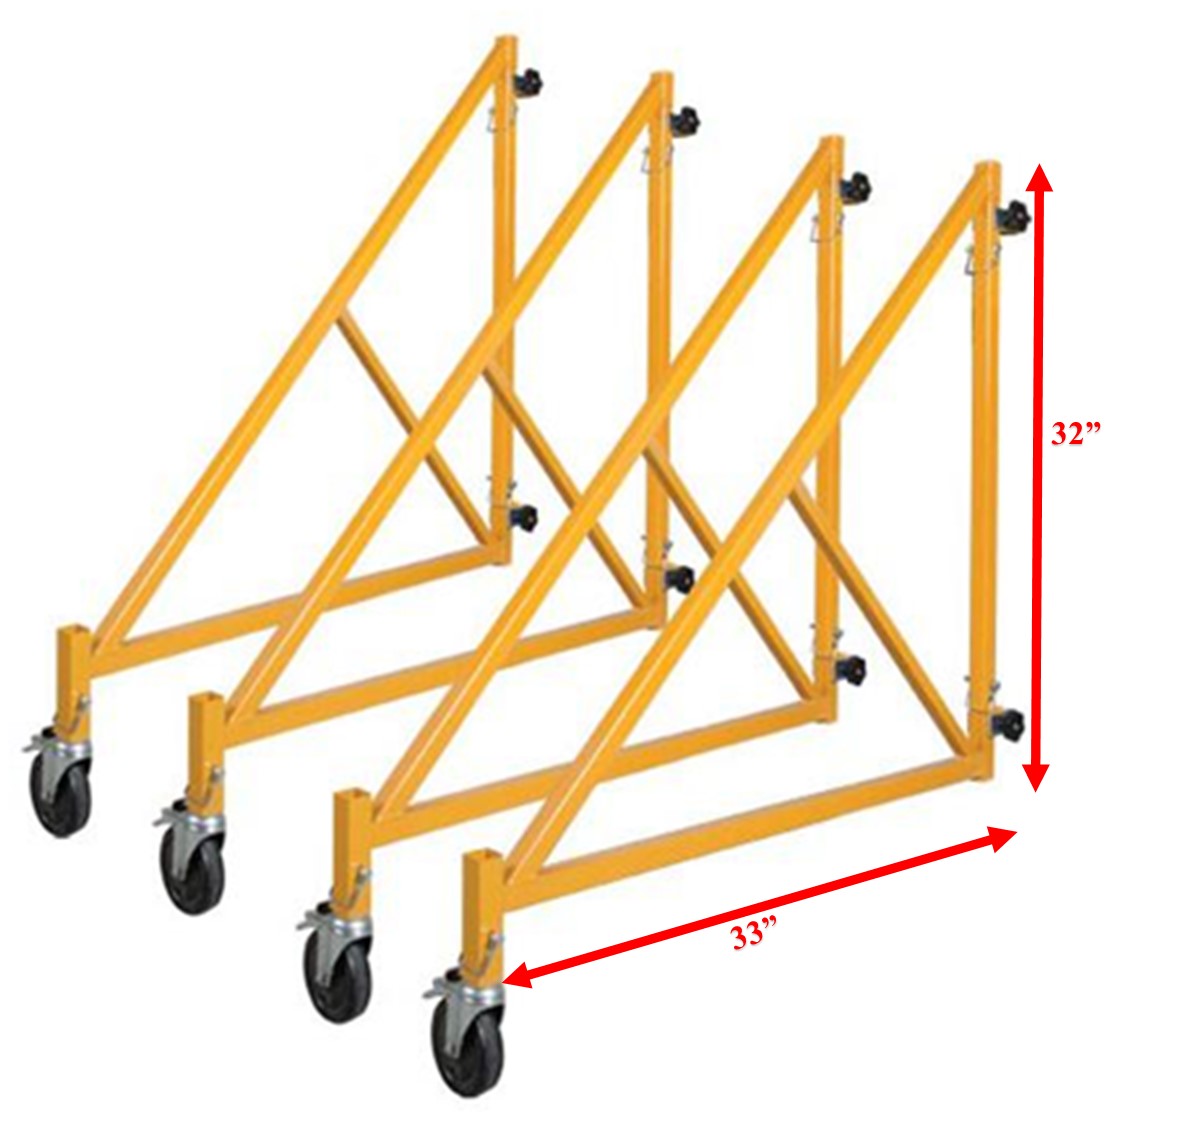 32" Outriggers for Scaffold